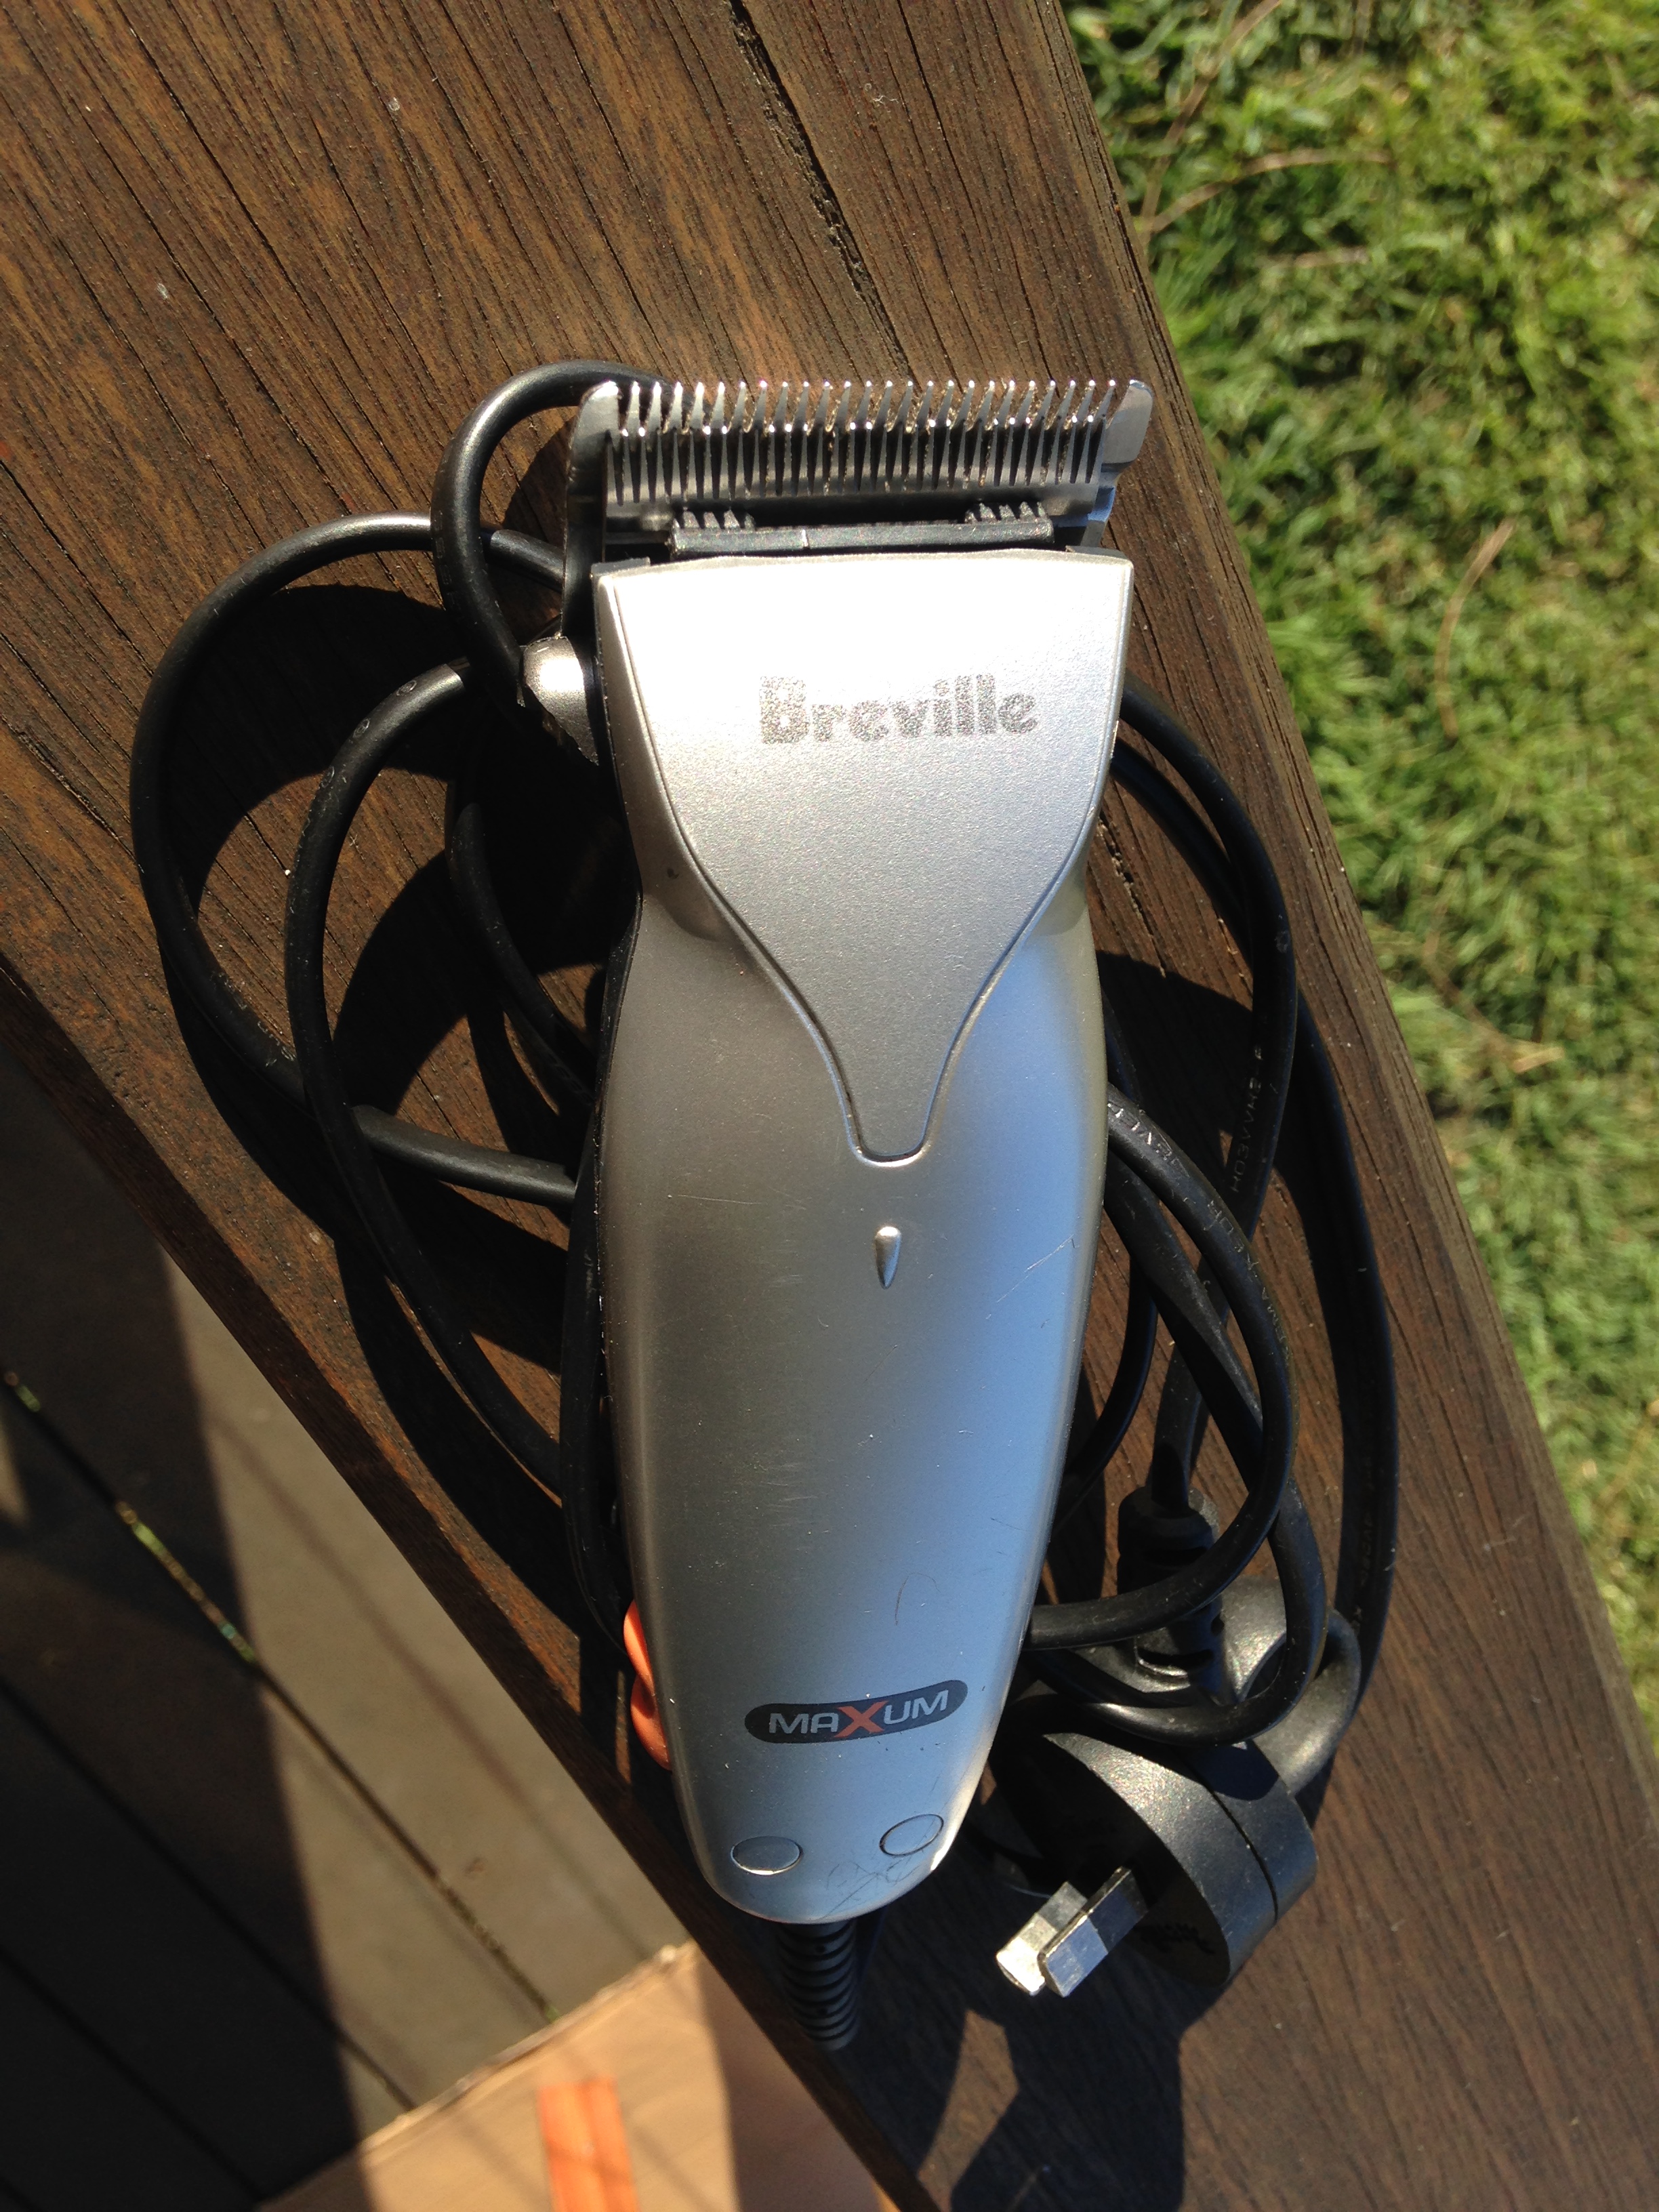 wahl arco se cordless clipper review